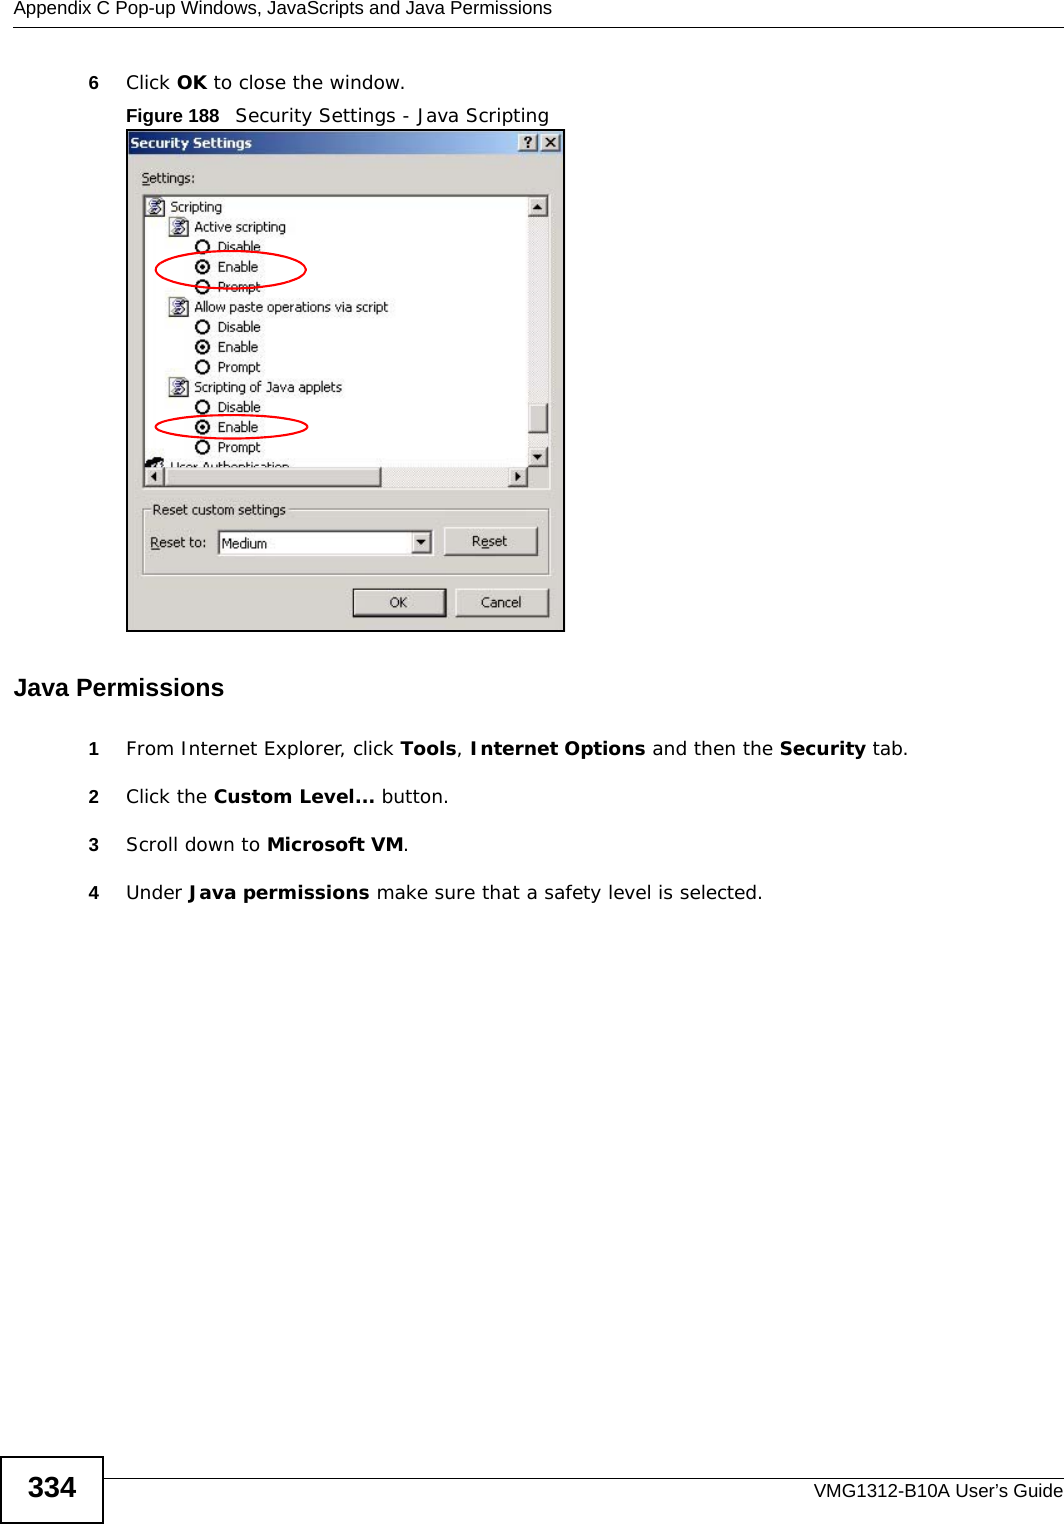 Appendix C Pop-up Windows, JavaScripts and Java PermissionsVMG1312-B10A User’s Guide3346Click OK to close the window.Figure 188   Security Settings - Java ScriptingJava Permissions1From Internet Explorer, click Tools, Internet Options and then the Security tab. 2Click the Custom Level... button. 3Scroll down to Microsoft VM. 4Under Java permissions make sure that a safety level is selected.